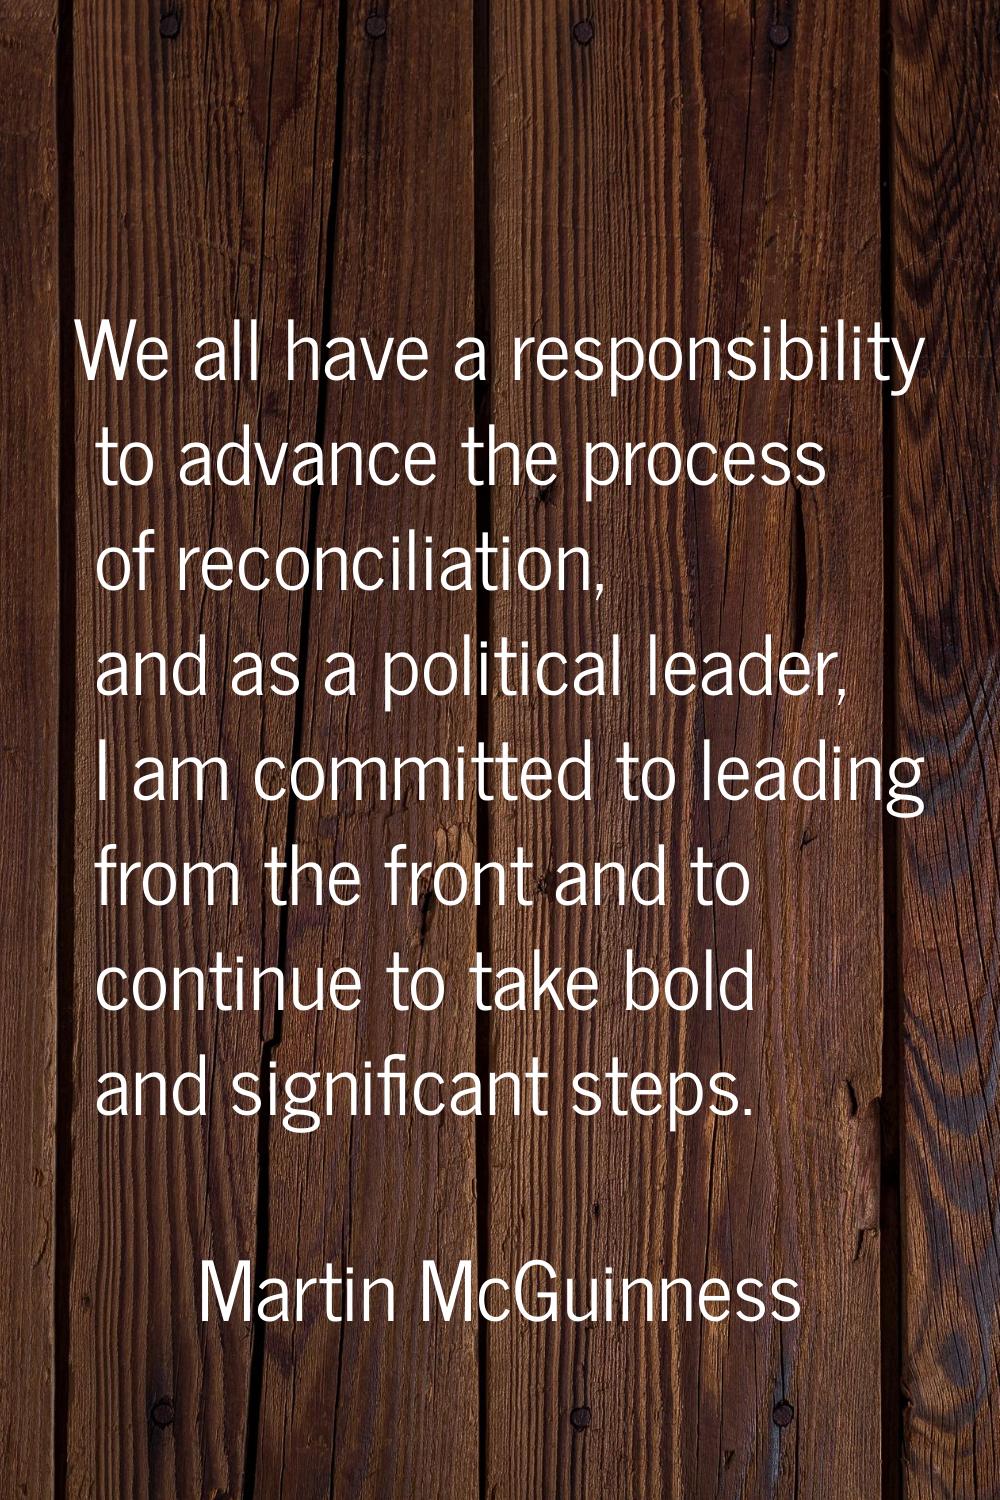 We all have a responsibility to advance the process of reconciliation, and as a political leader, I